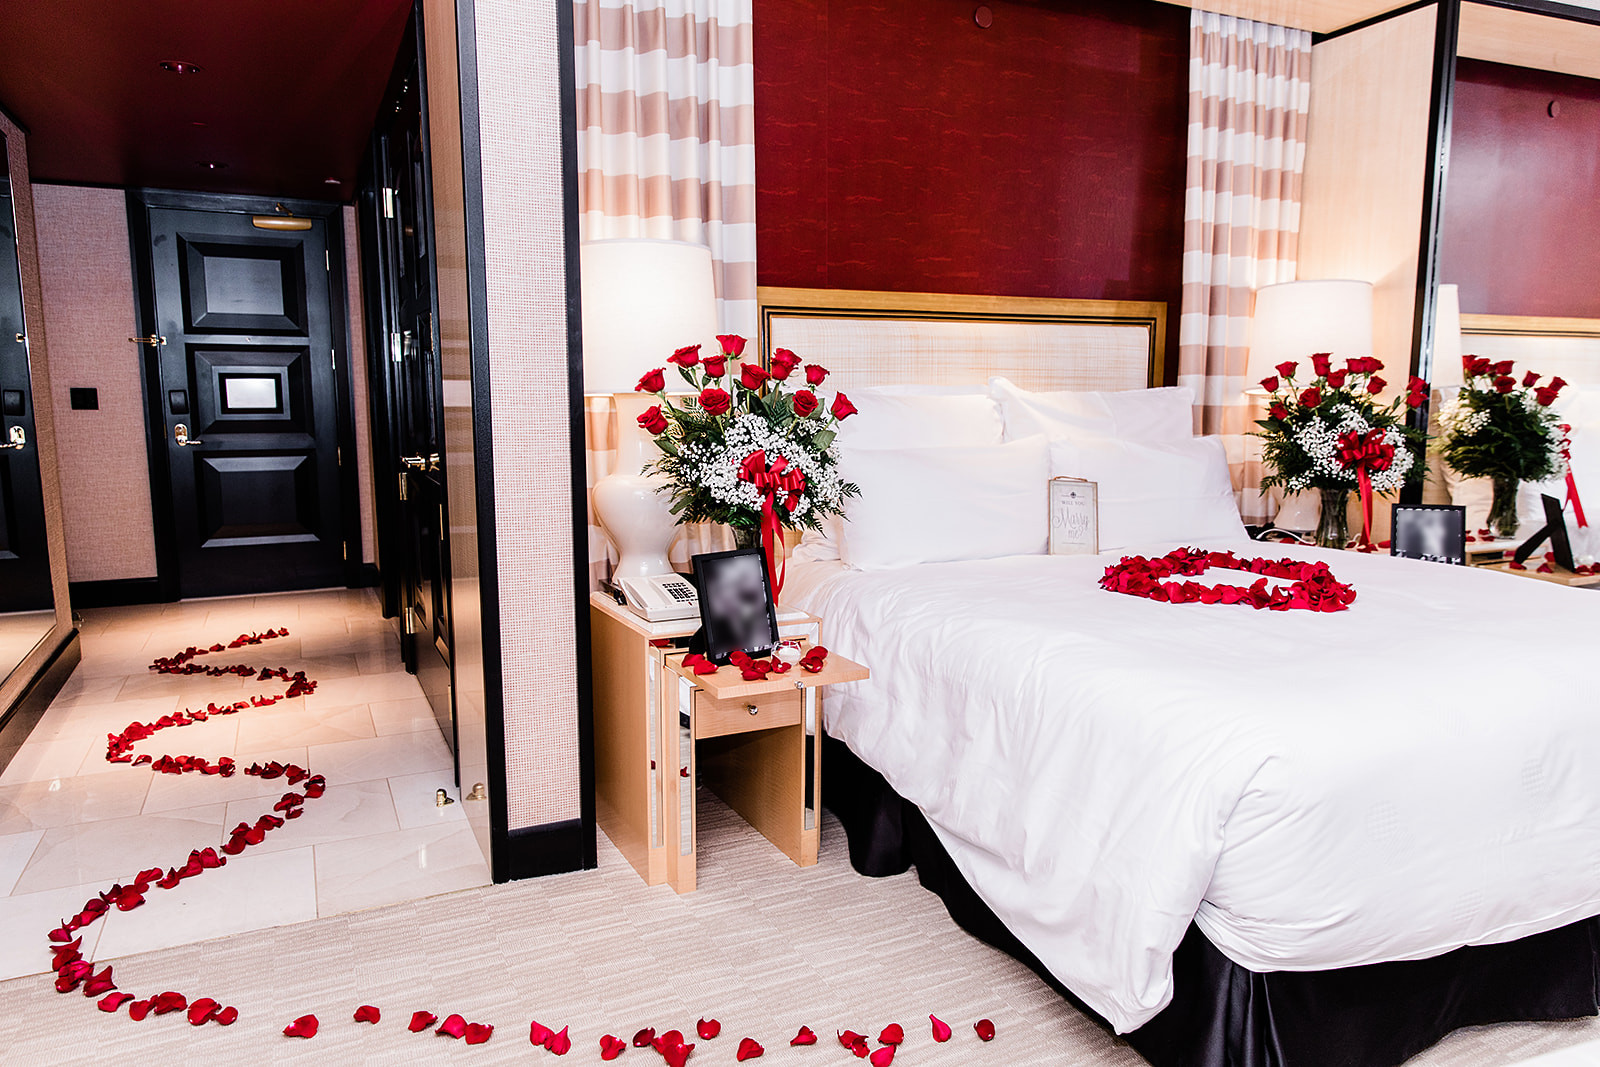 Vegas marriage proposal in hotel room with rose petals leading to bed with roses